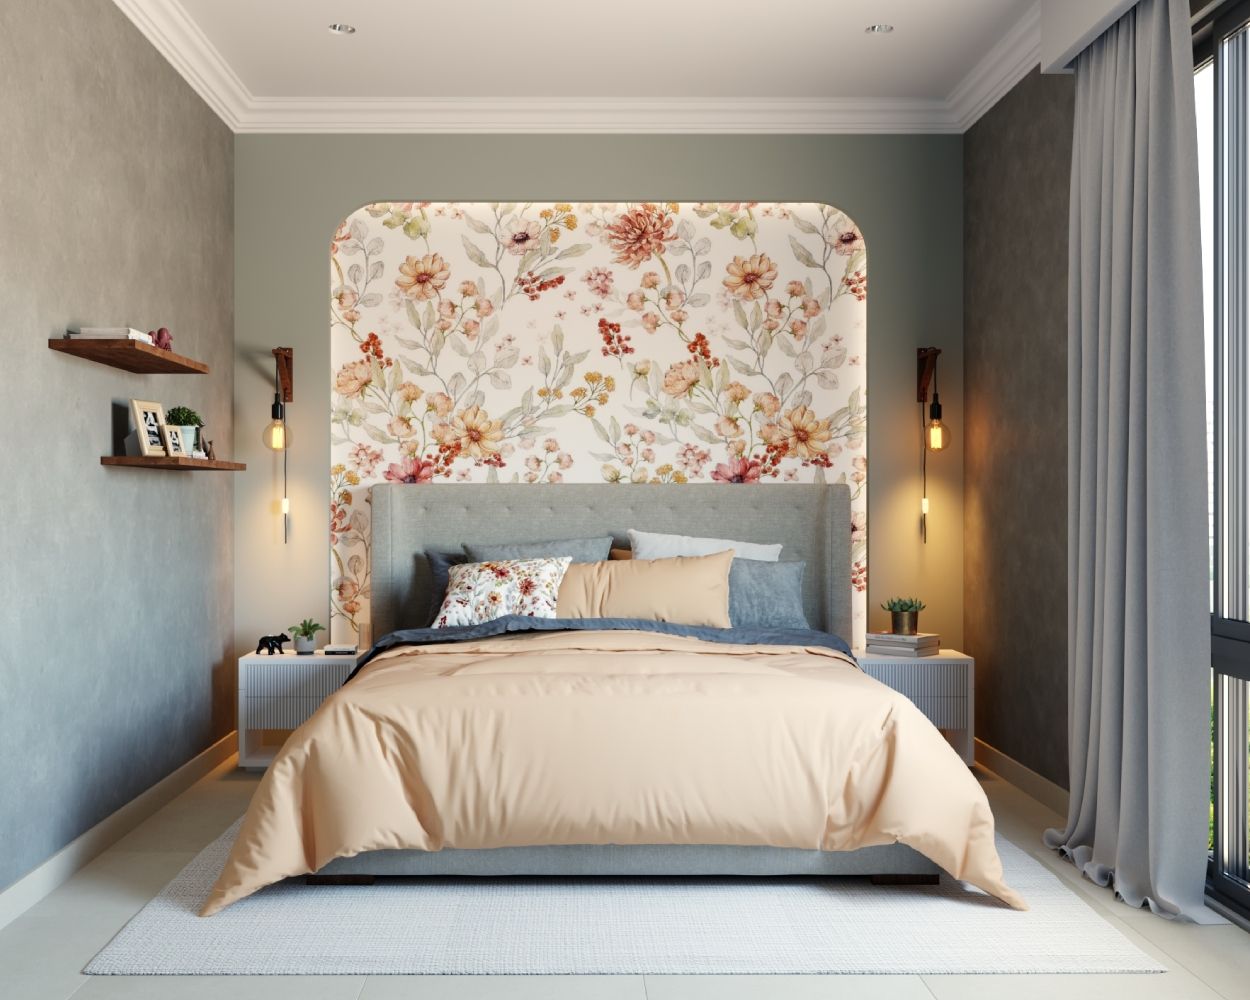 Classic Grey Master Bedroom Design With Floral Wallpaper